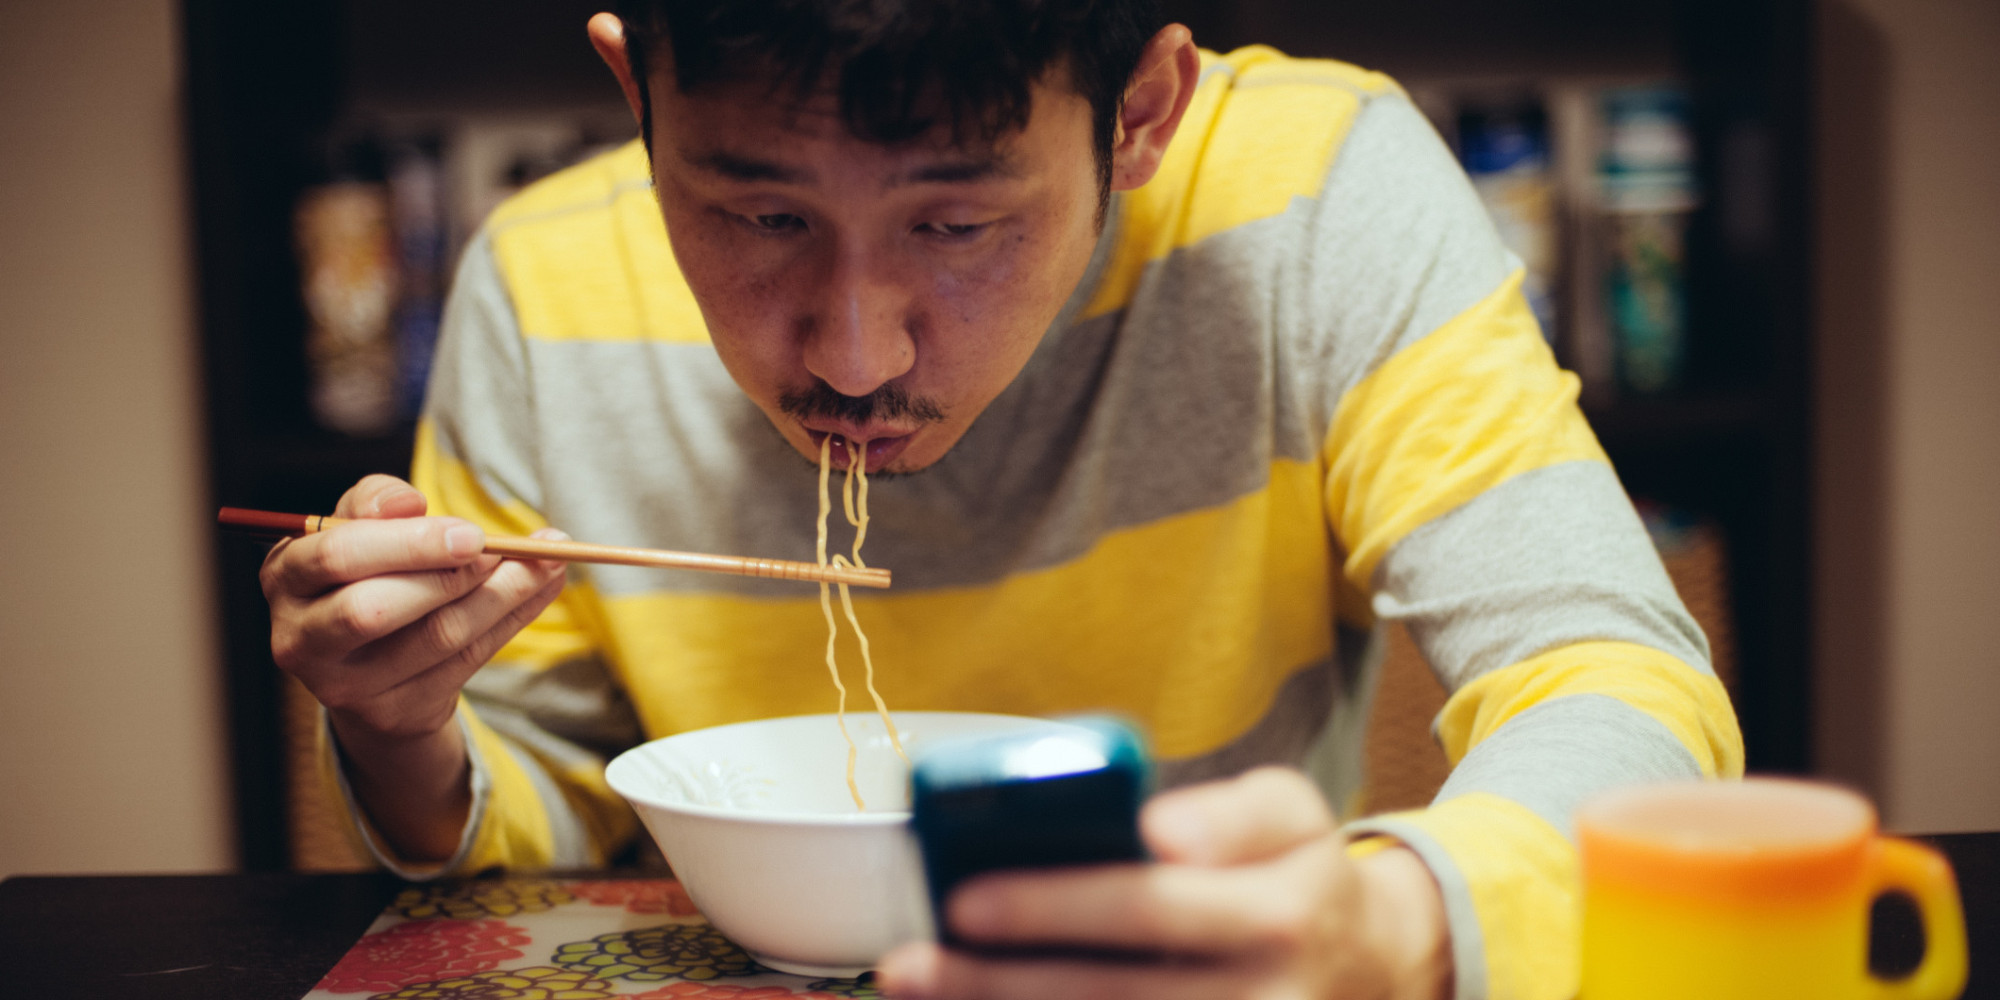 Japanese man eating noodles while reading